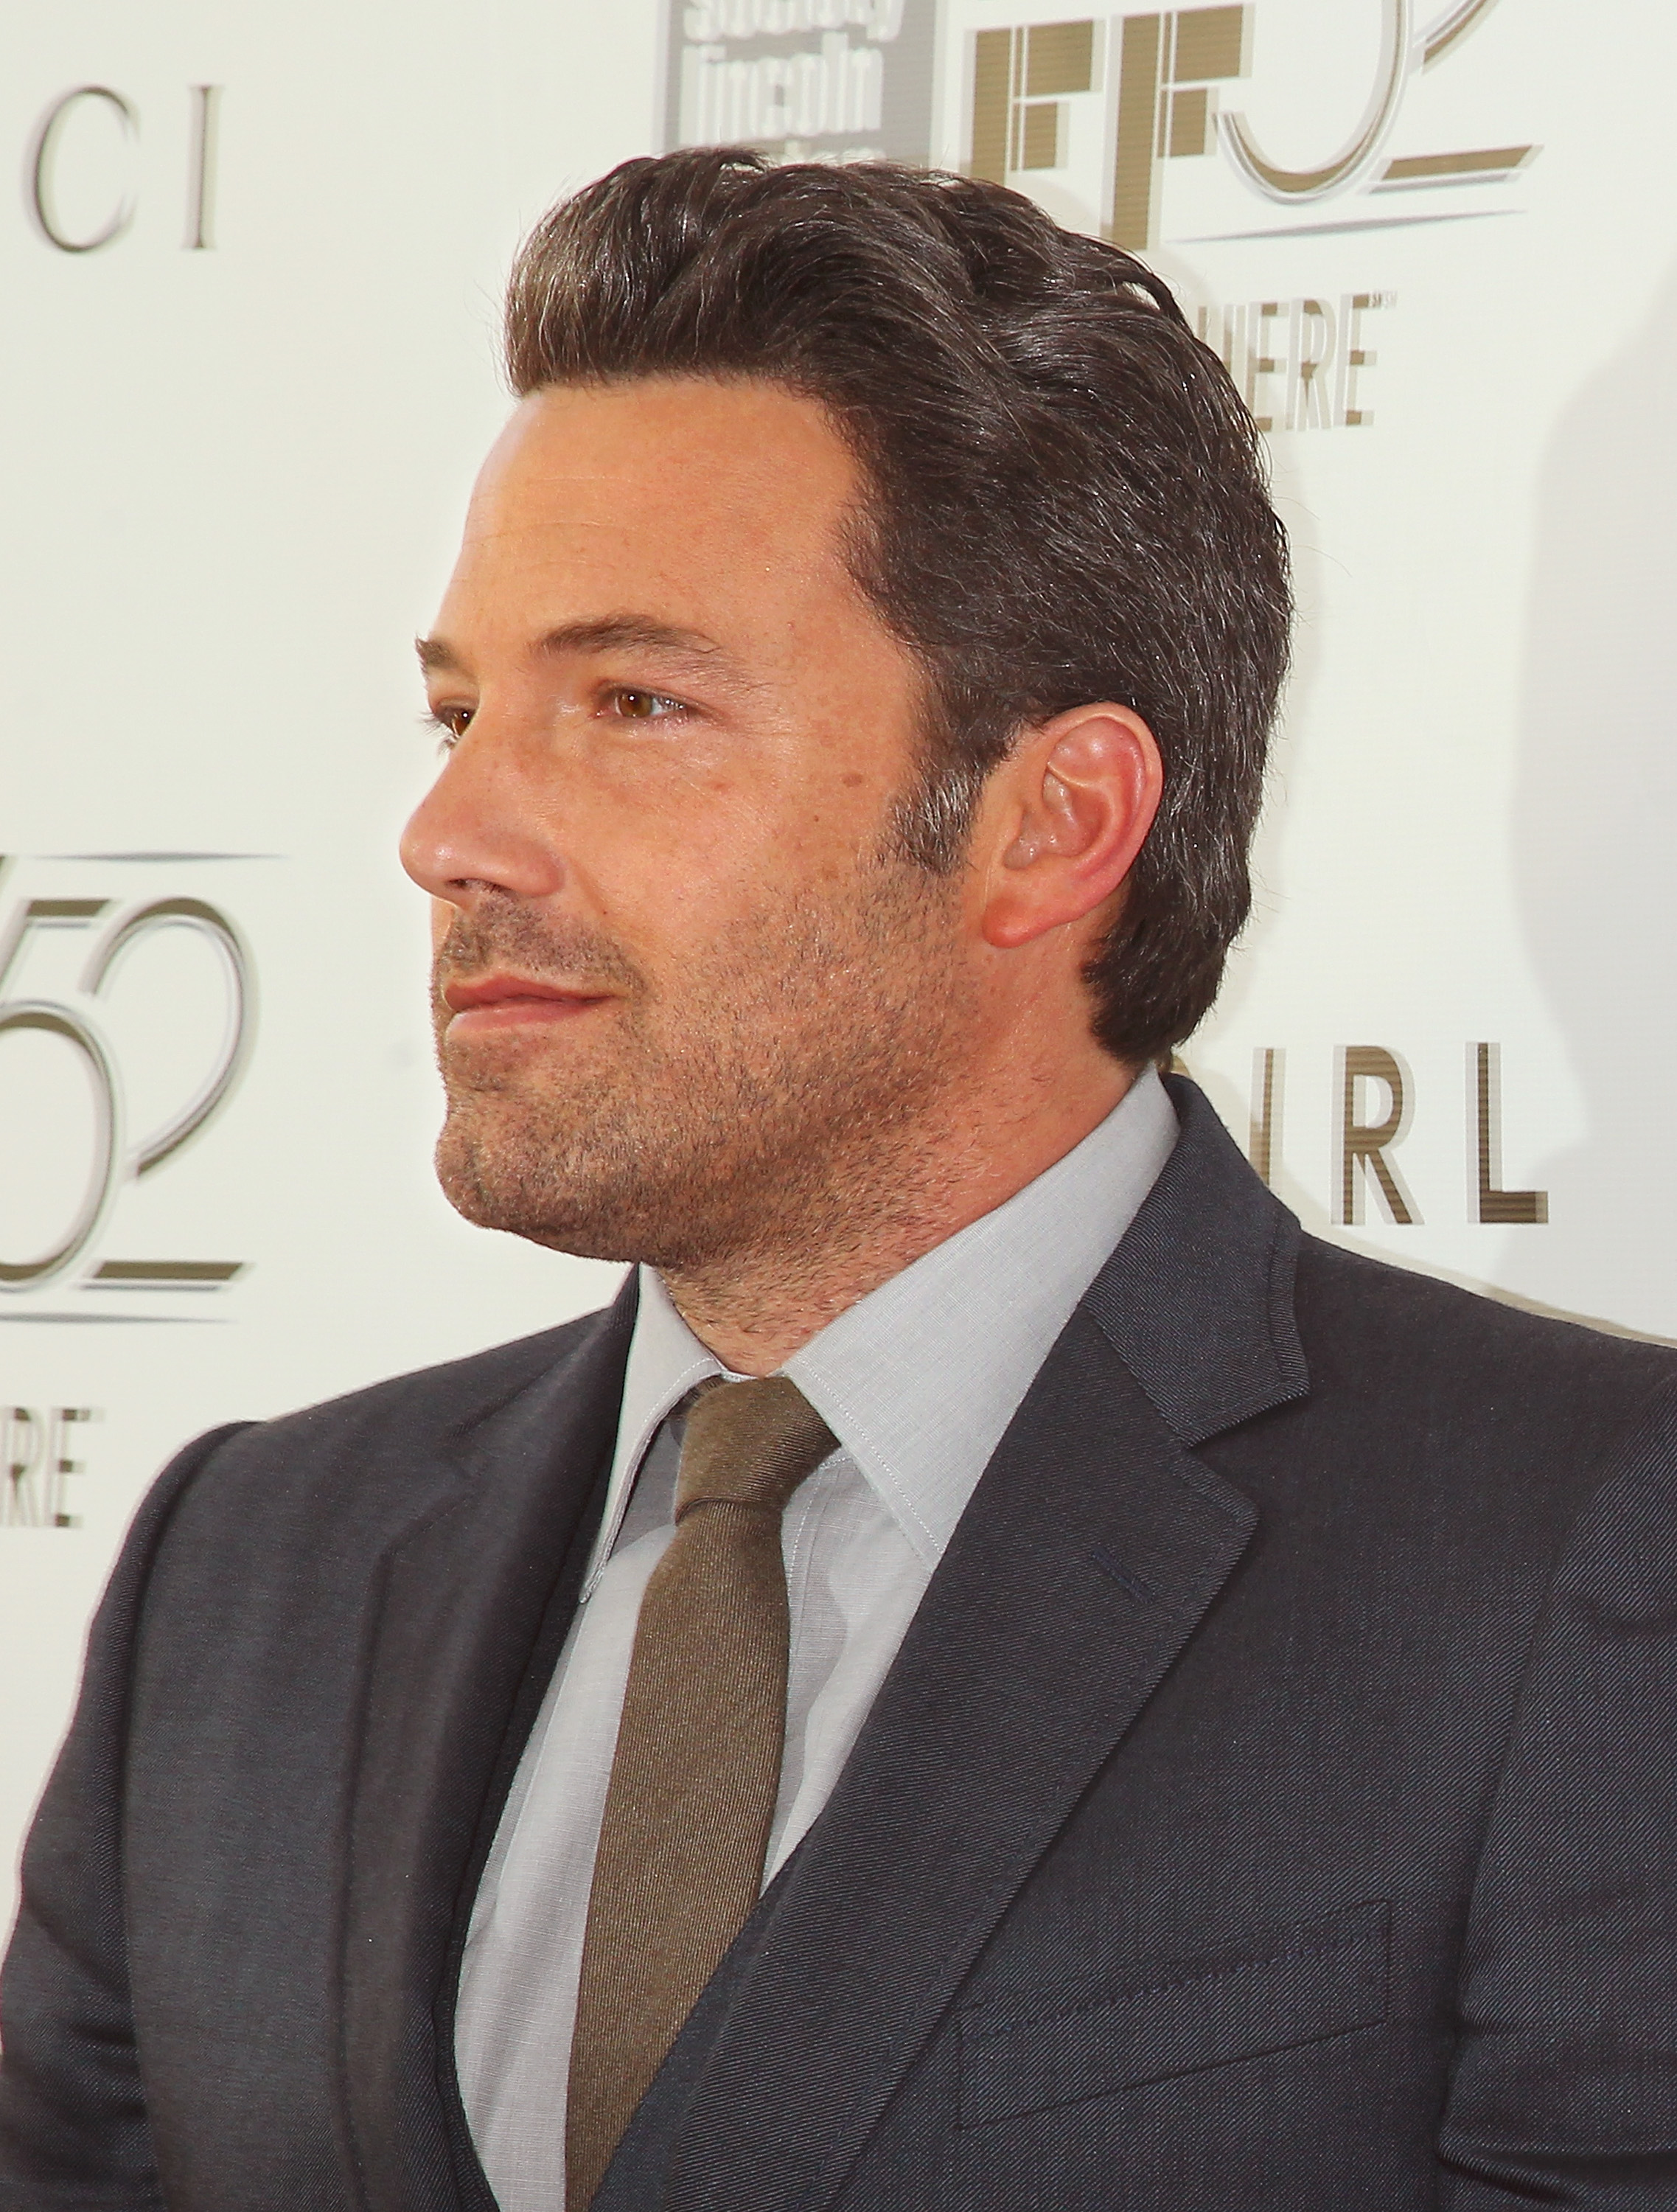 52nd New York Film Festival Opening Night Gala Presentation And World Premiere Of "Gone Girl"